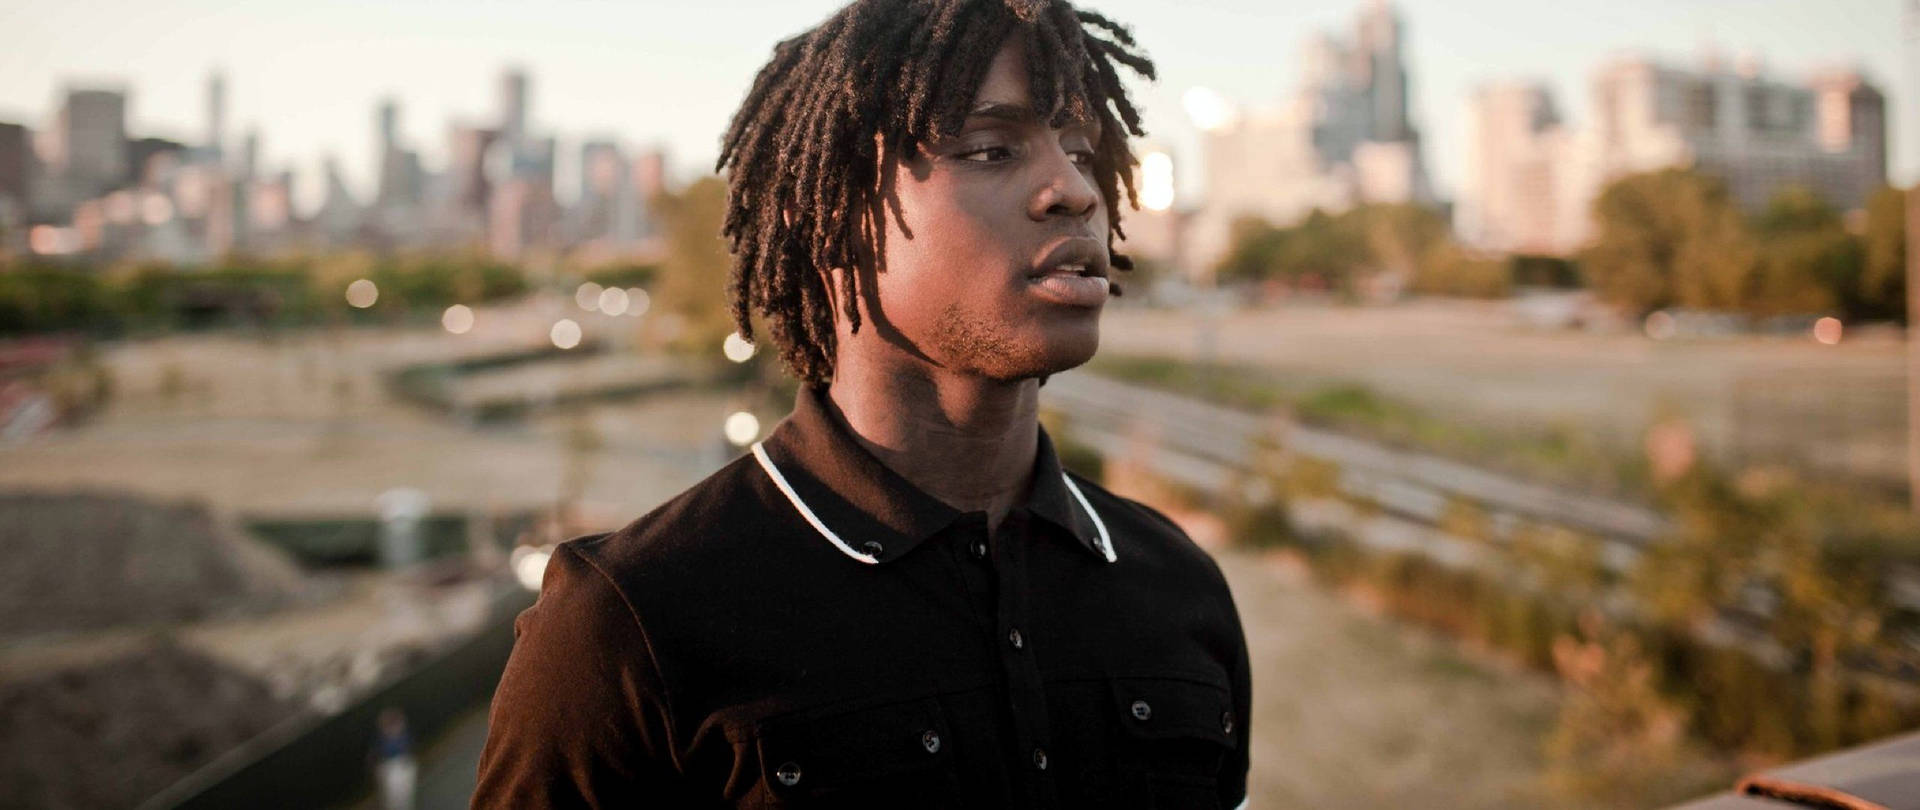 Chief Keef Wallpaper